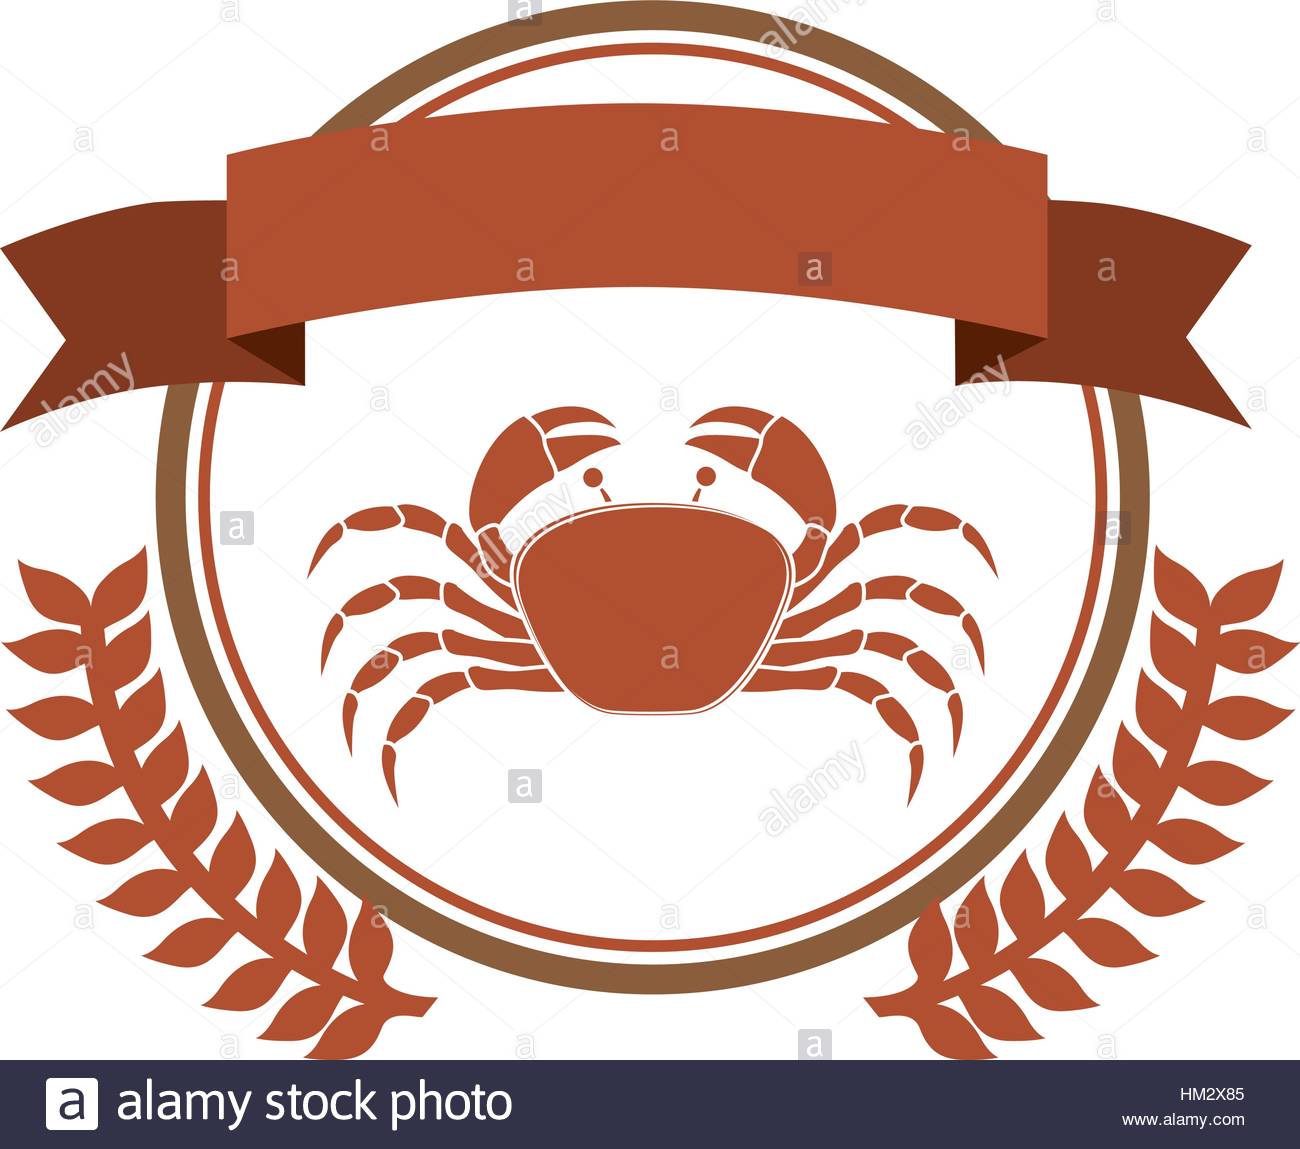 circular border with crown branch with crab and label vector Stock.